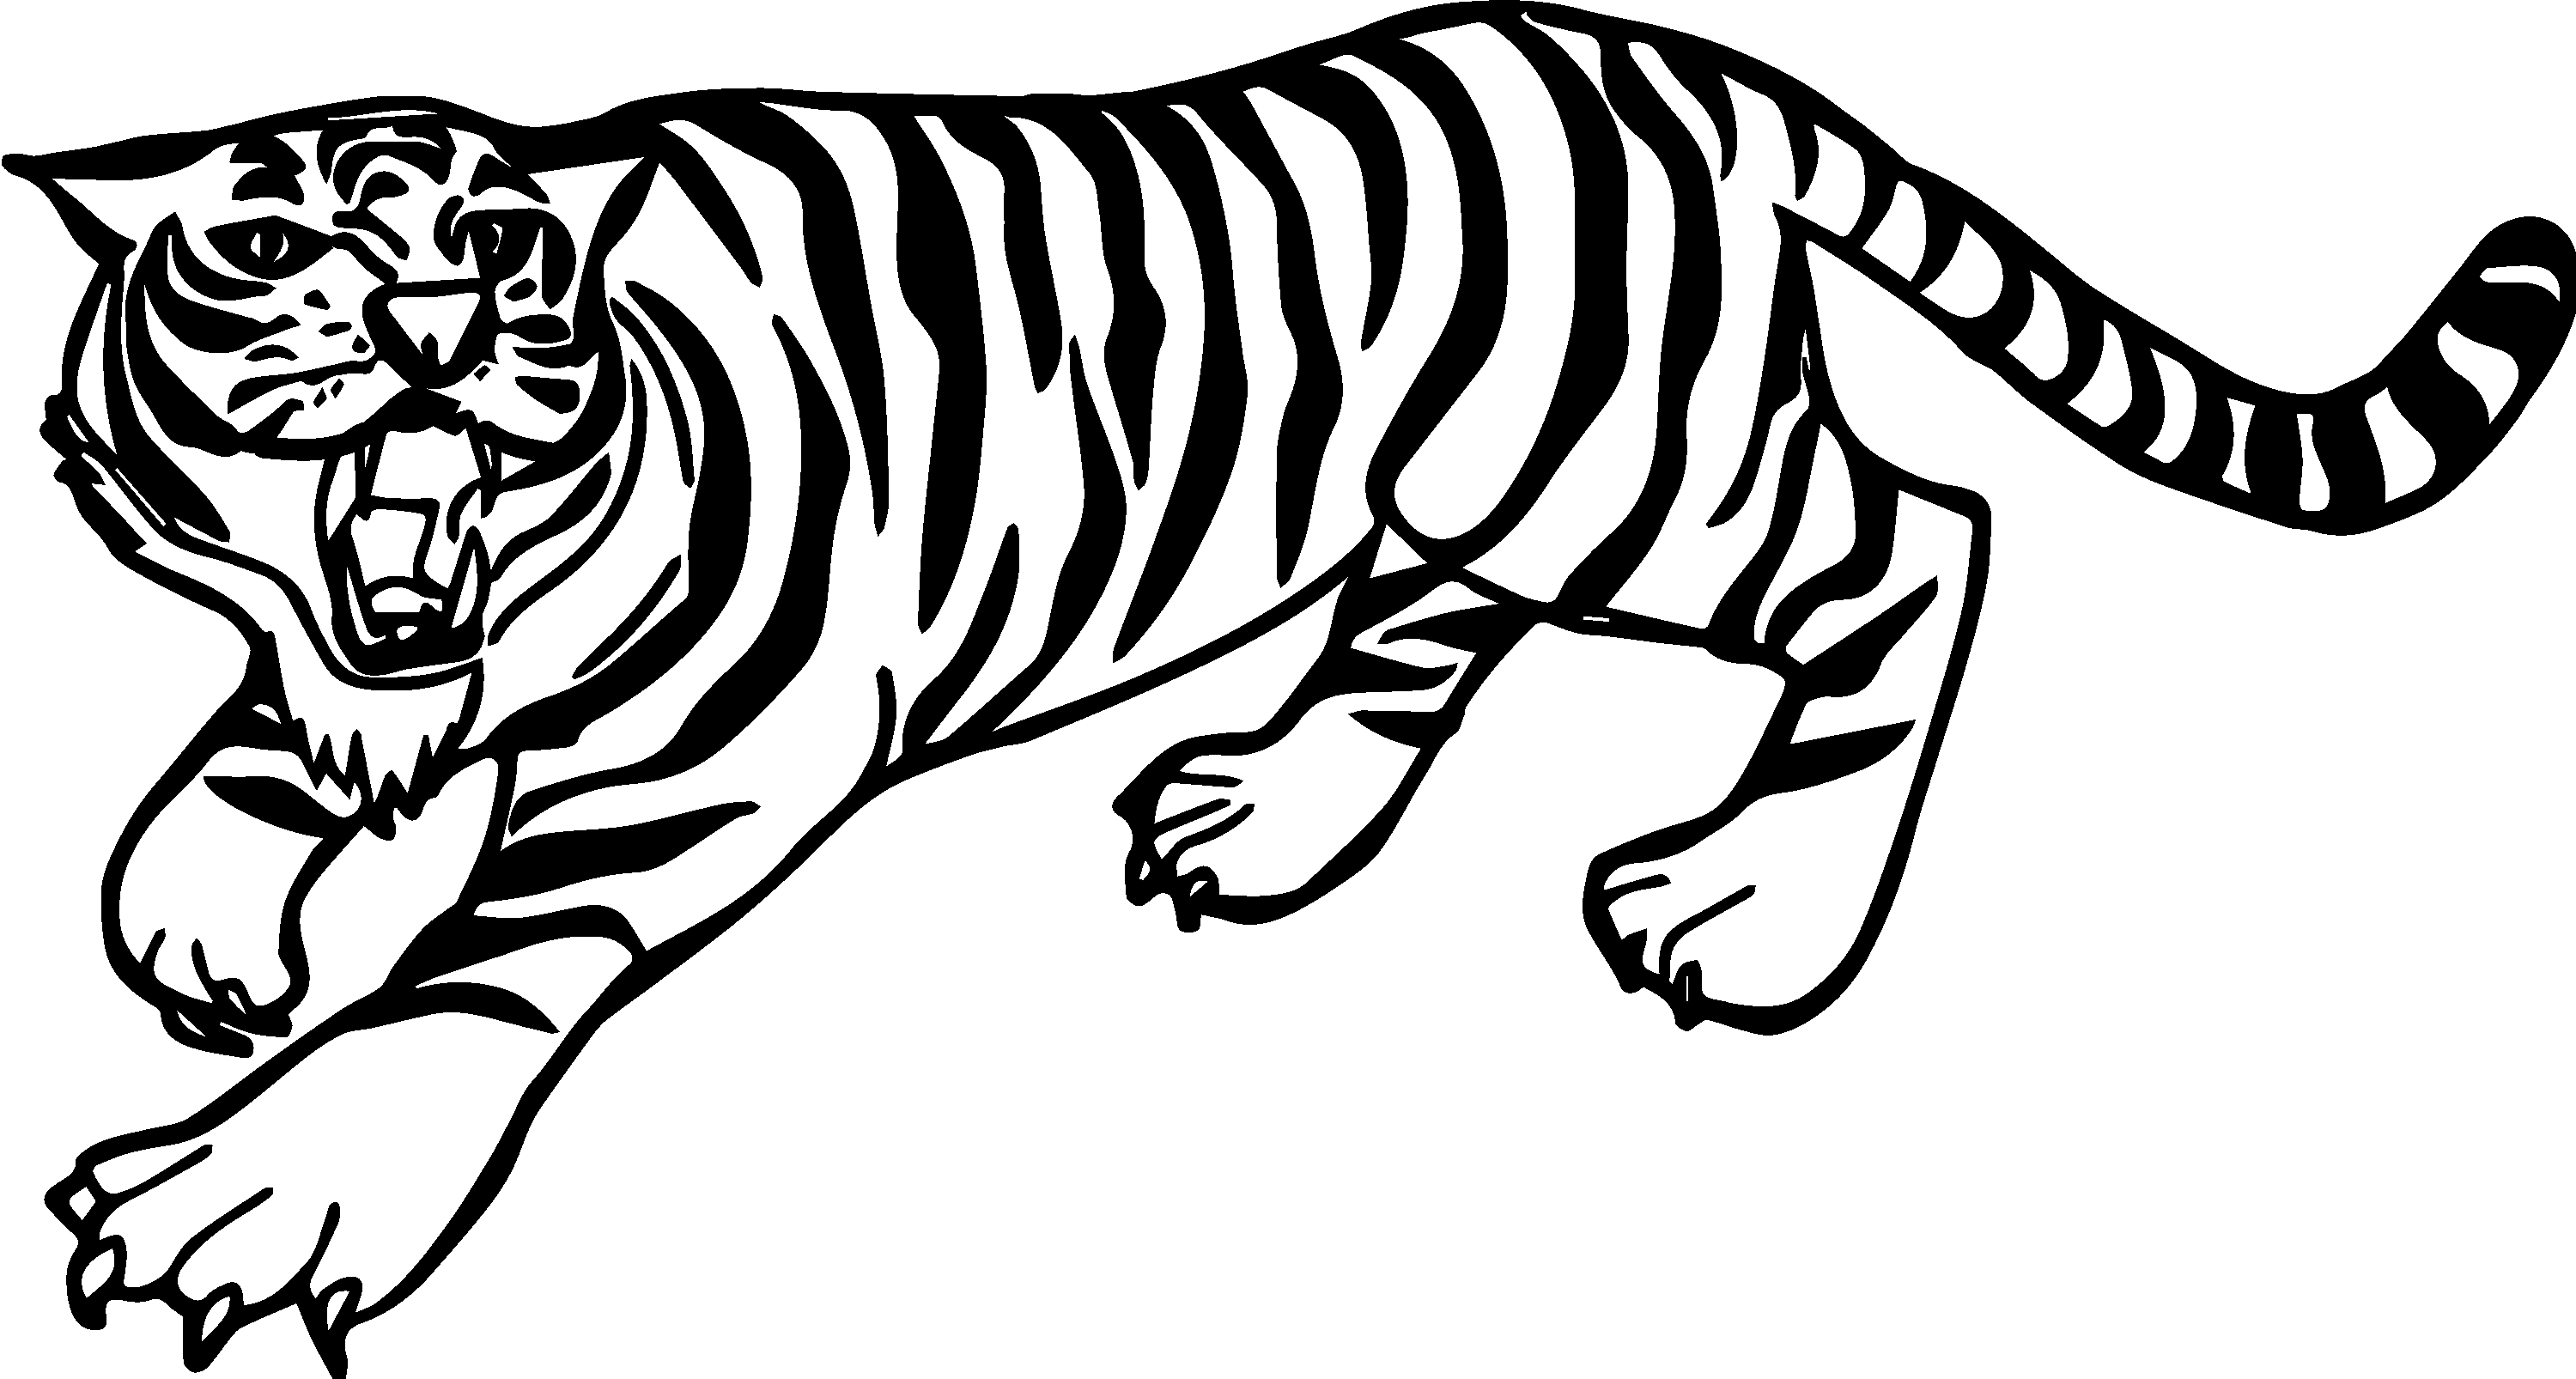 tiger coloring page tiger coloring page free printable coloring pages page tiger coloring 